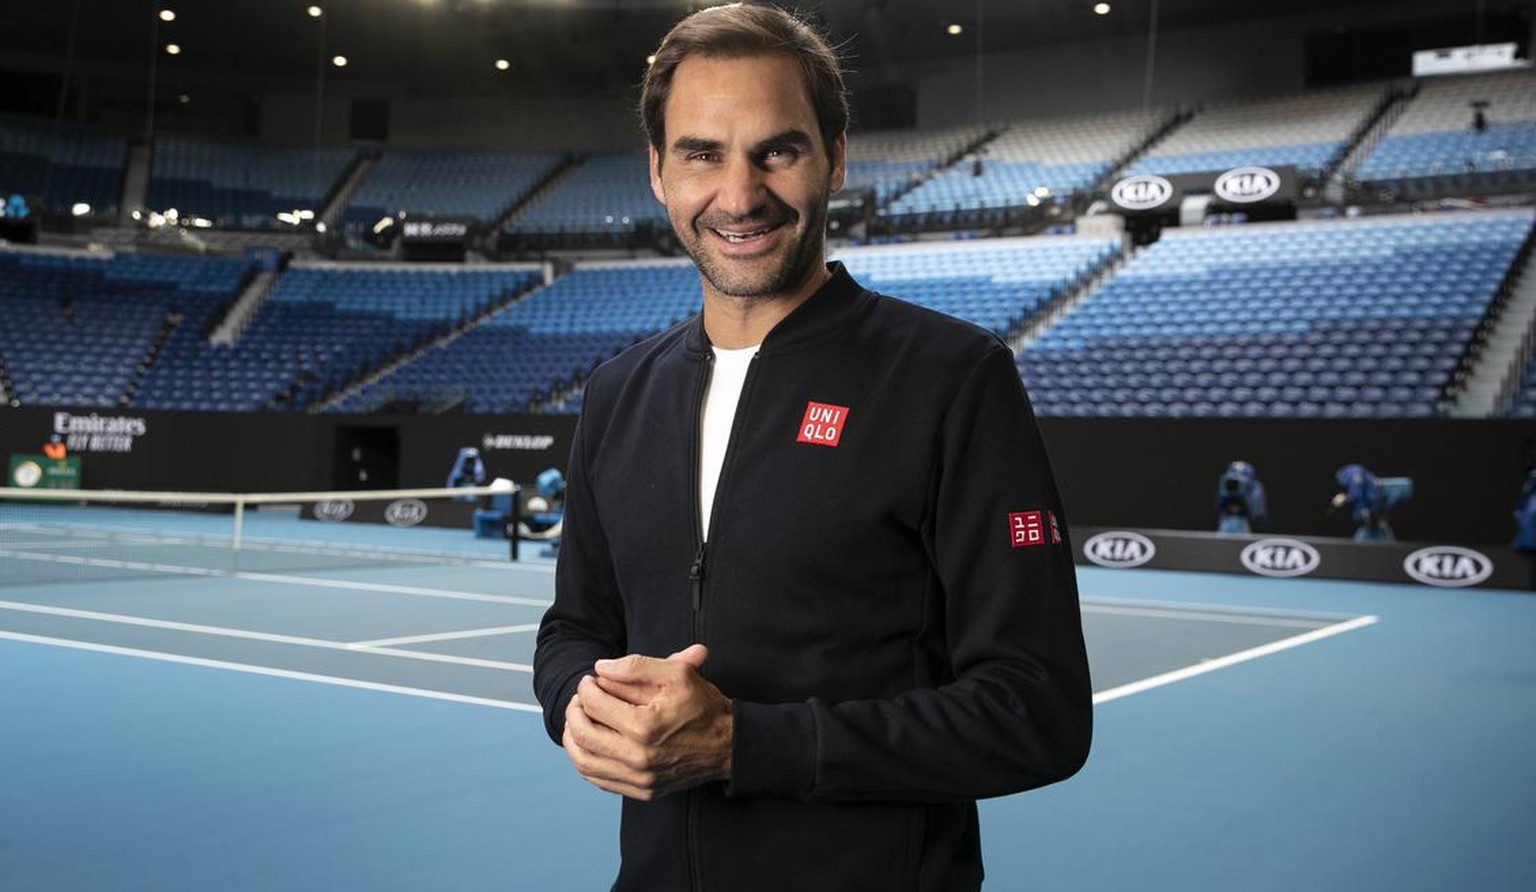 epa08118871 A handout photo made available by Tennis Australia shows Roger Federer of Switzerland posing for a photo during a practice session ahead of the Australian Open tennis tournament at Rod Lav ...